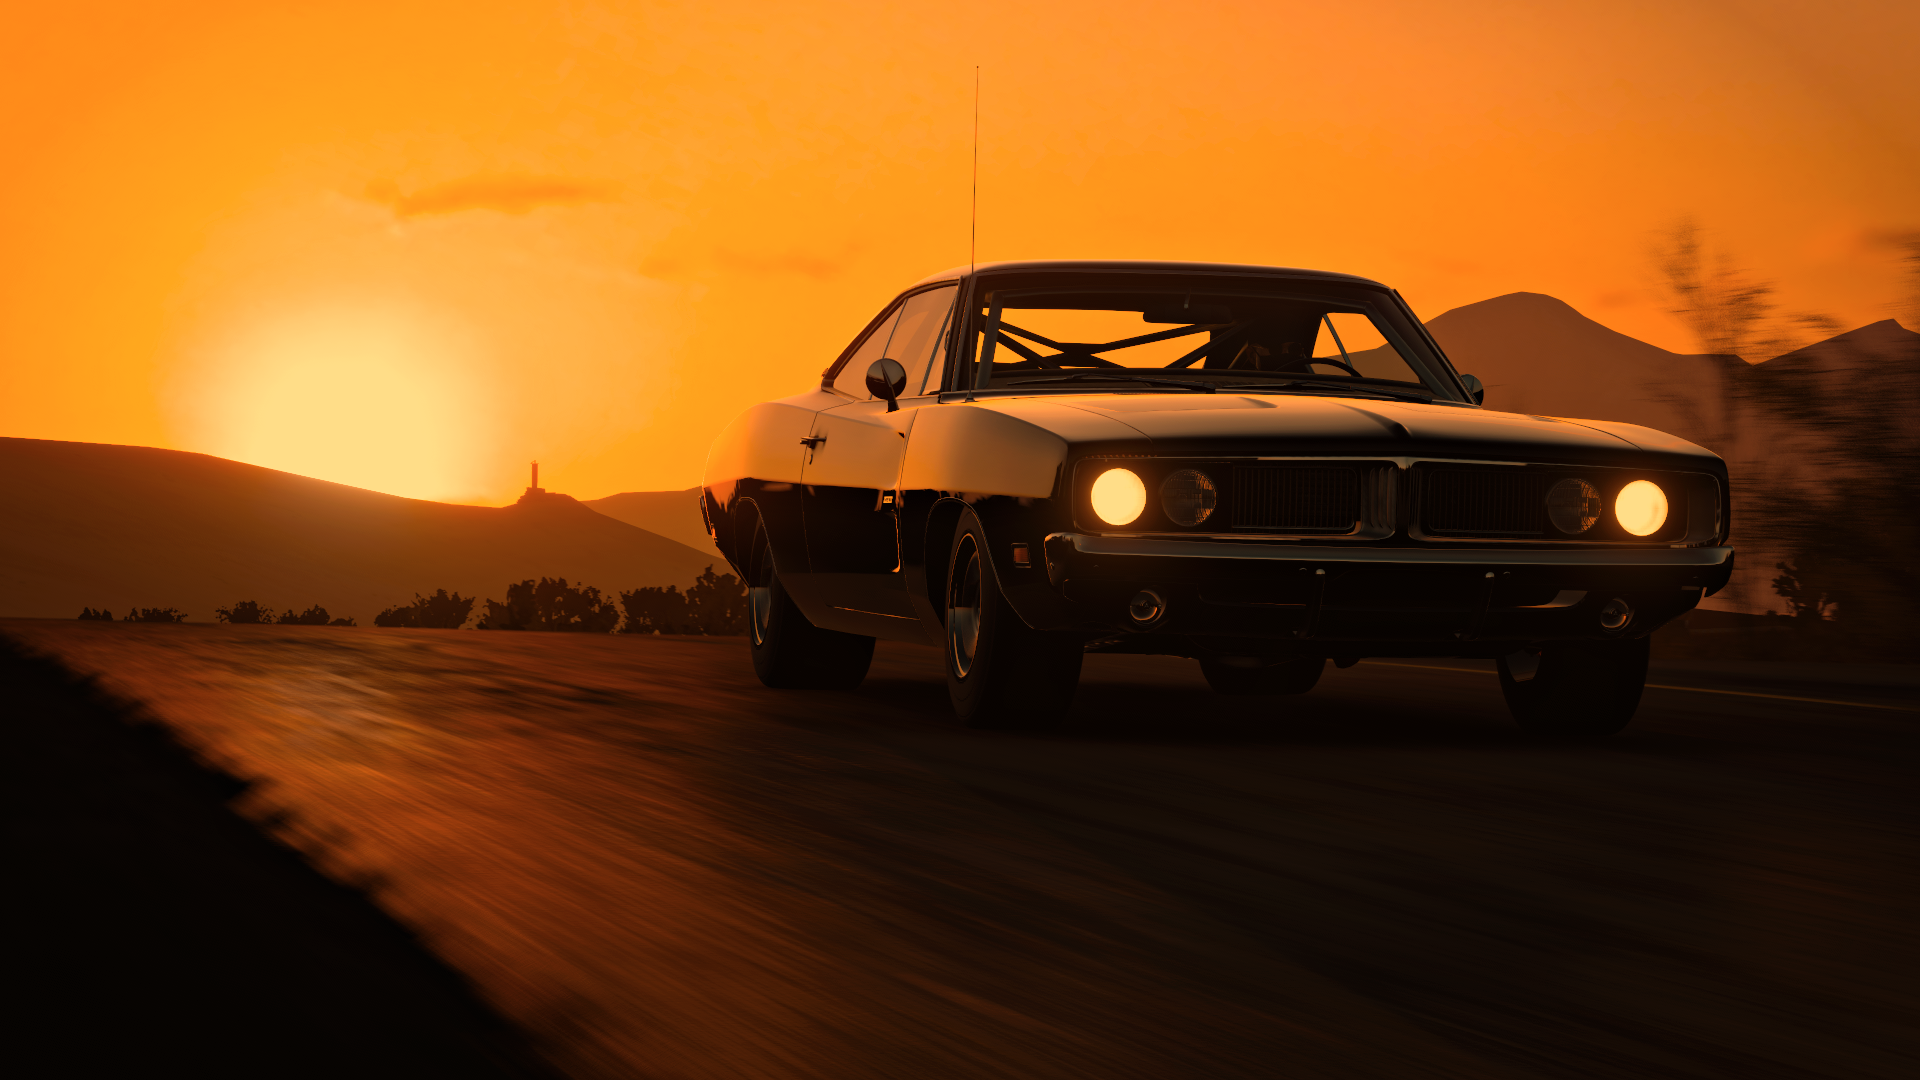 General 1920x1080 video games Forza Forza Horizon 5 orange dark Sun black road car Dodge Charger Dodge muscle cars American cars PlaygroundGames